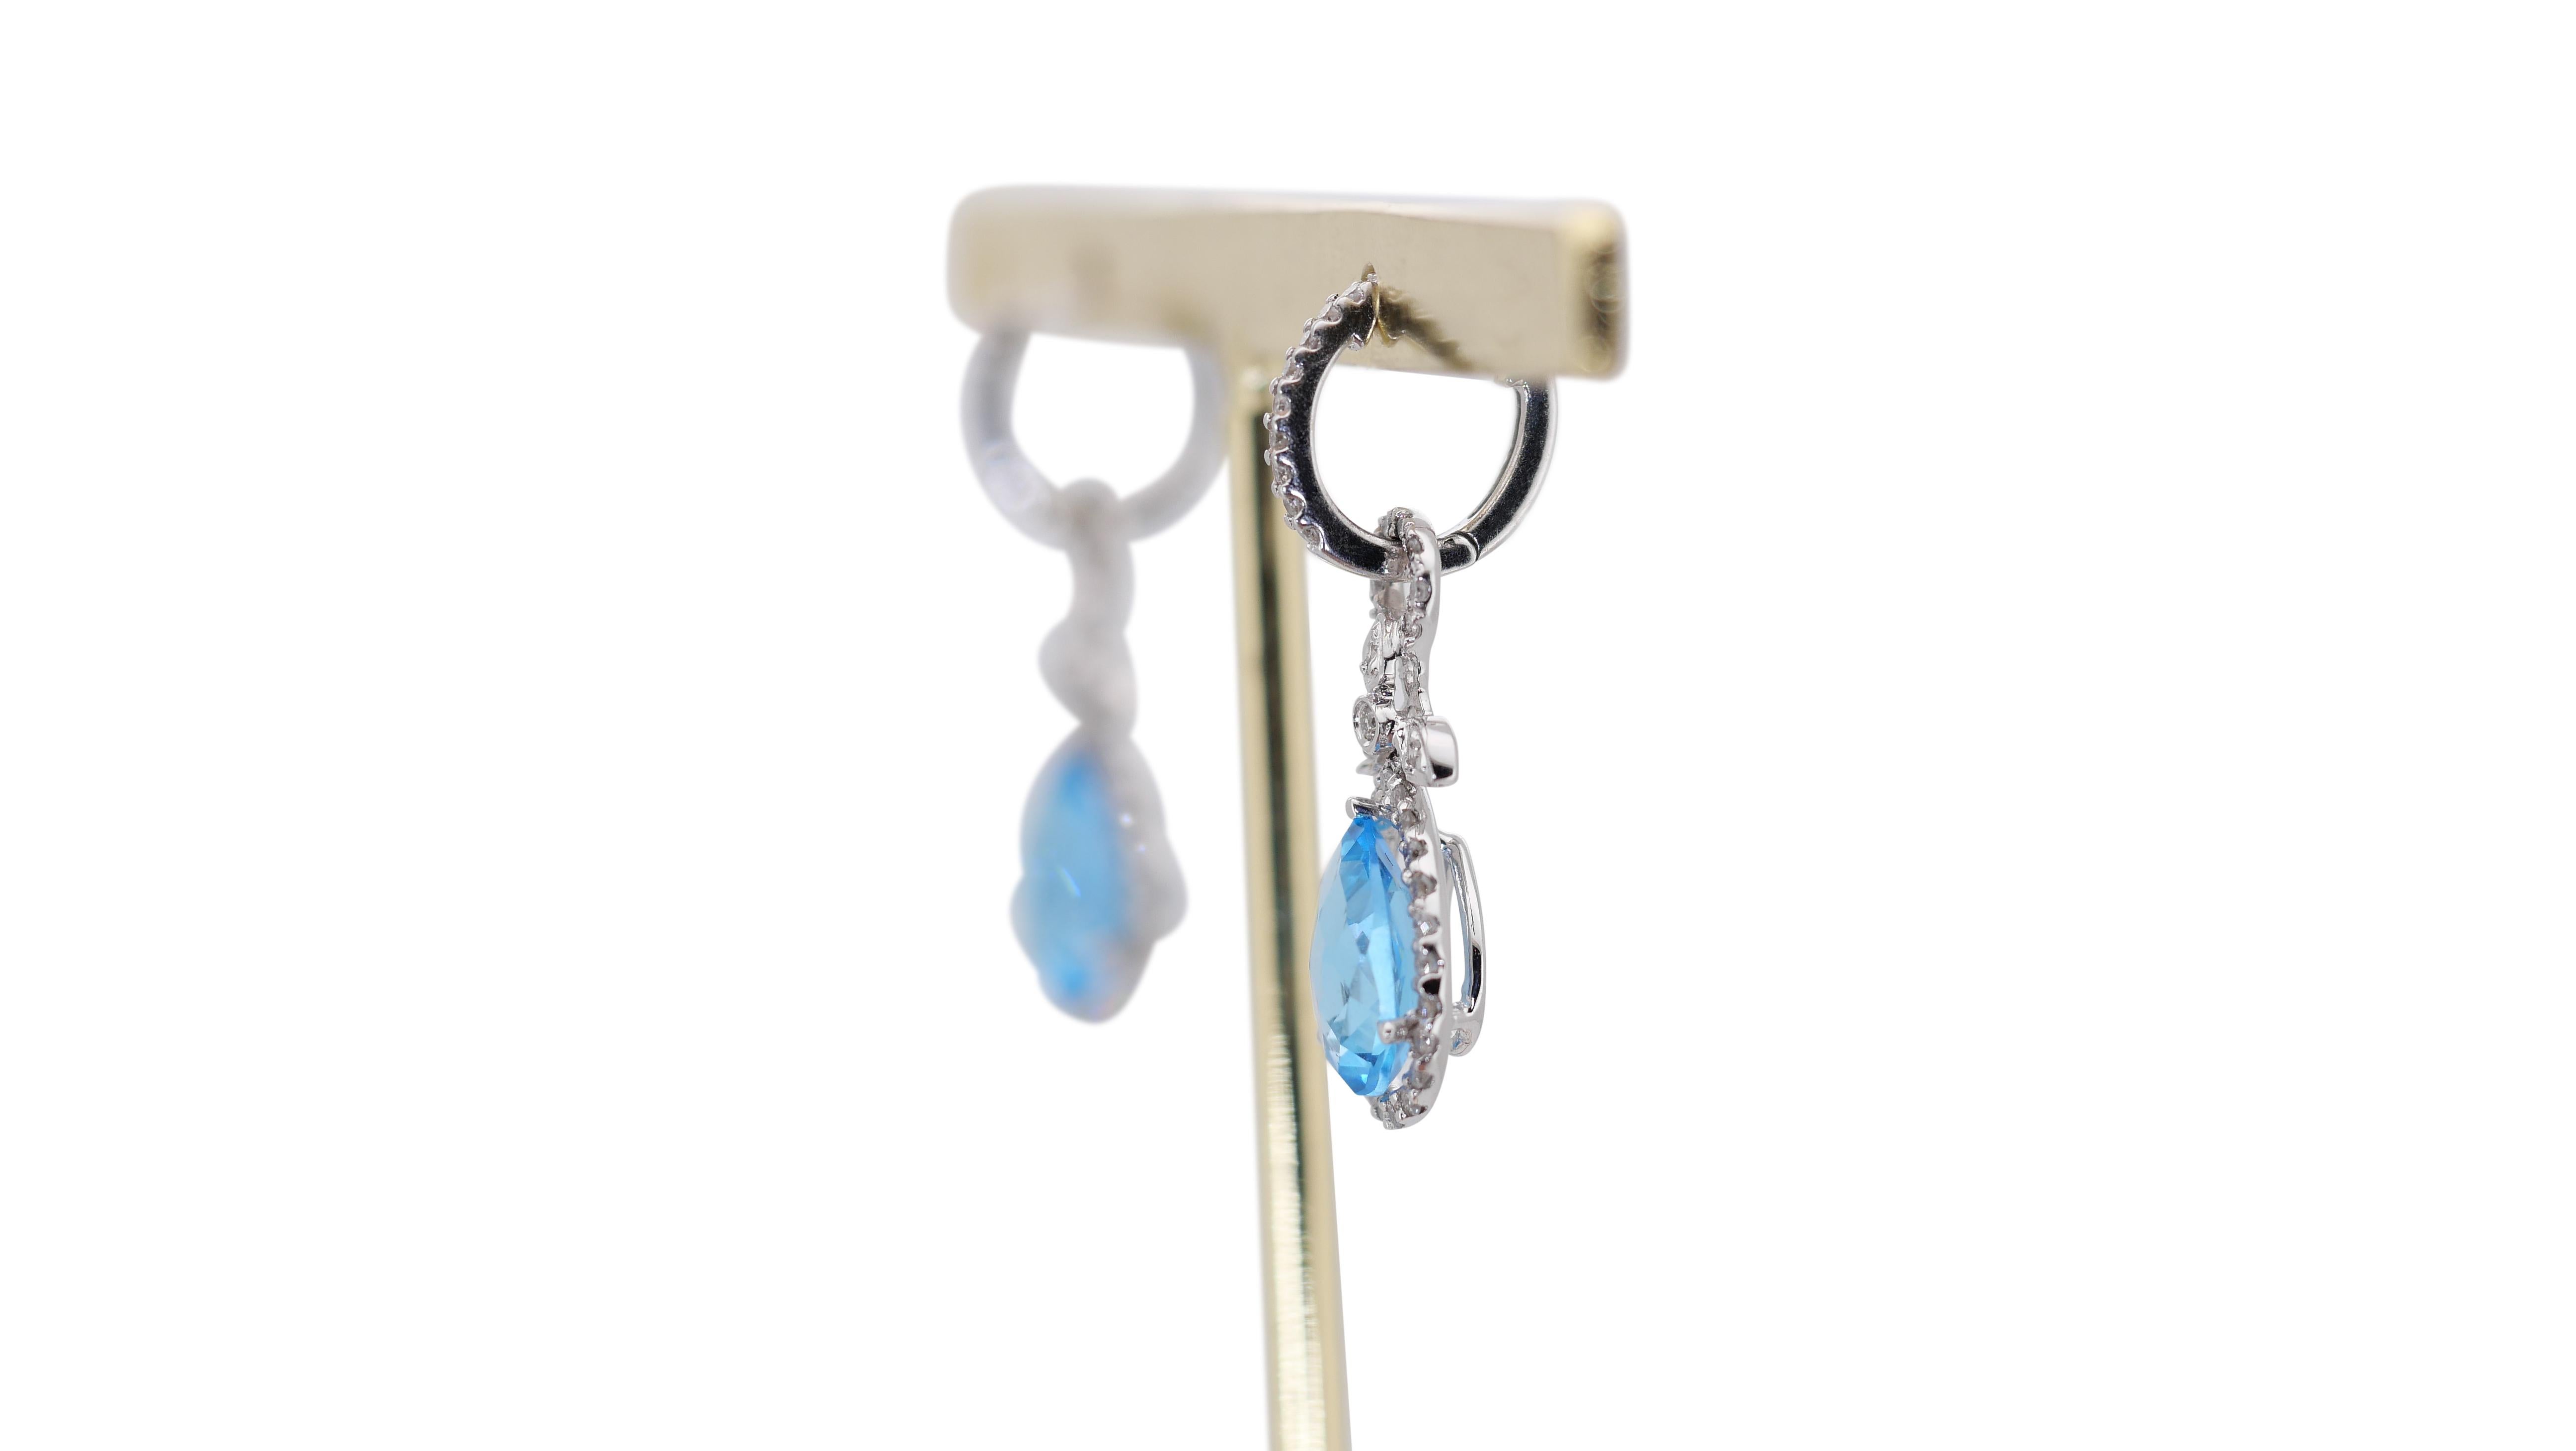 Luxurious 18k White Gold Dangle Earrings with 5 Carat Natural Topaz and Diamonds 1